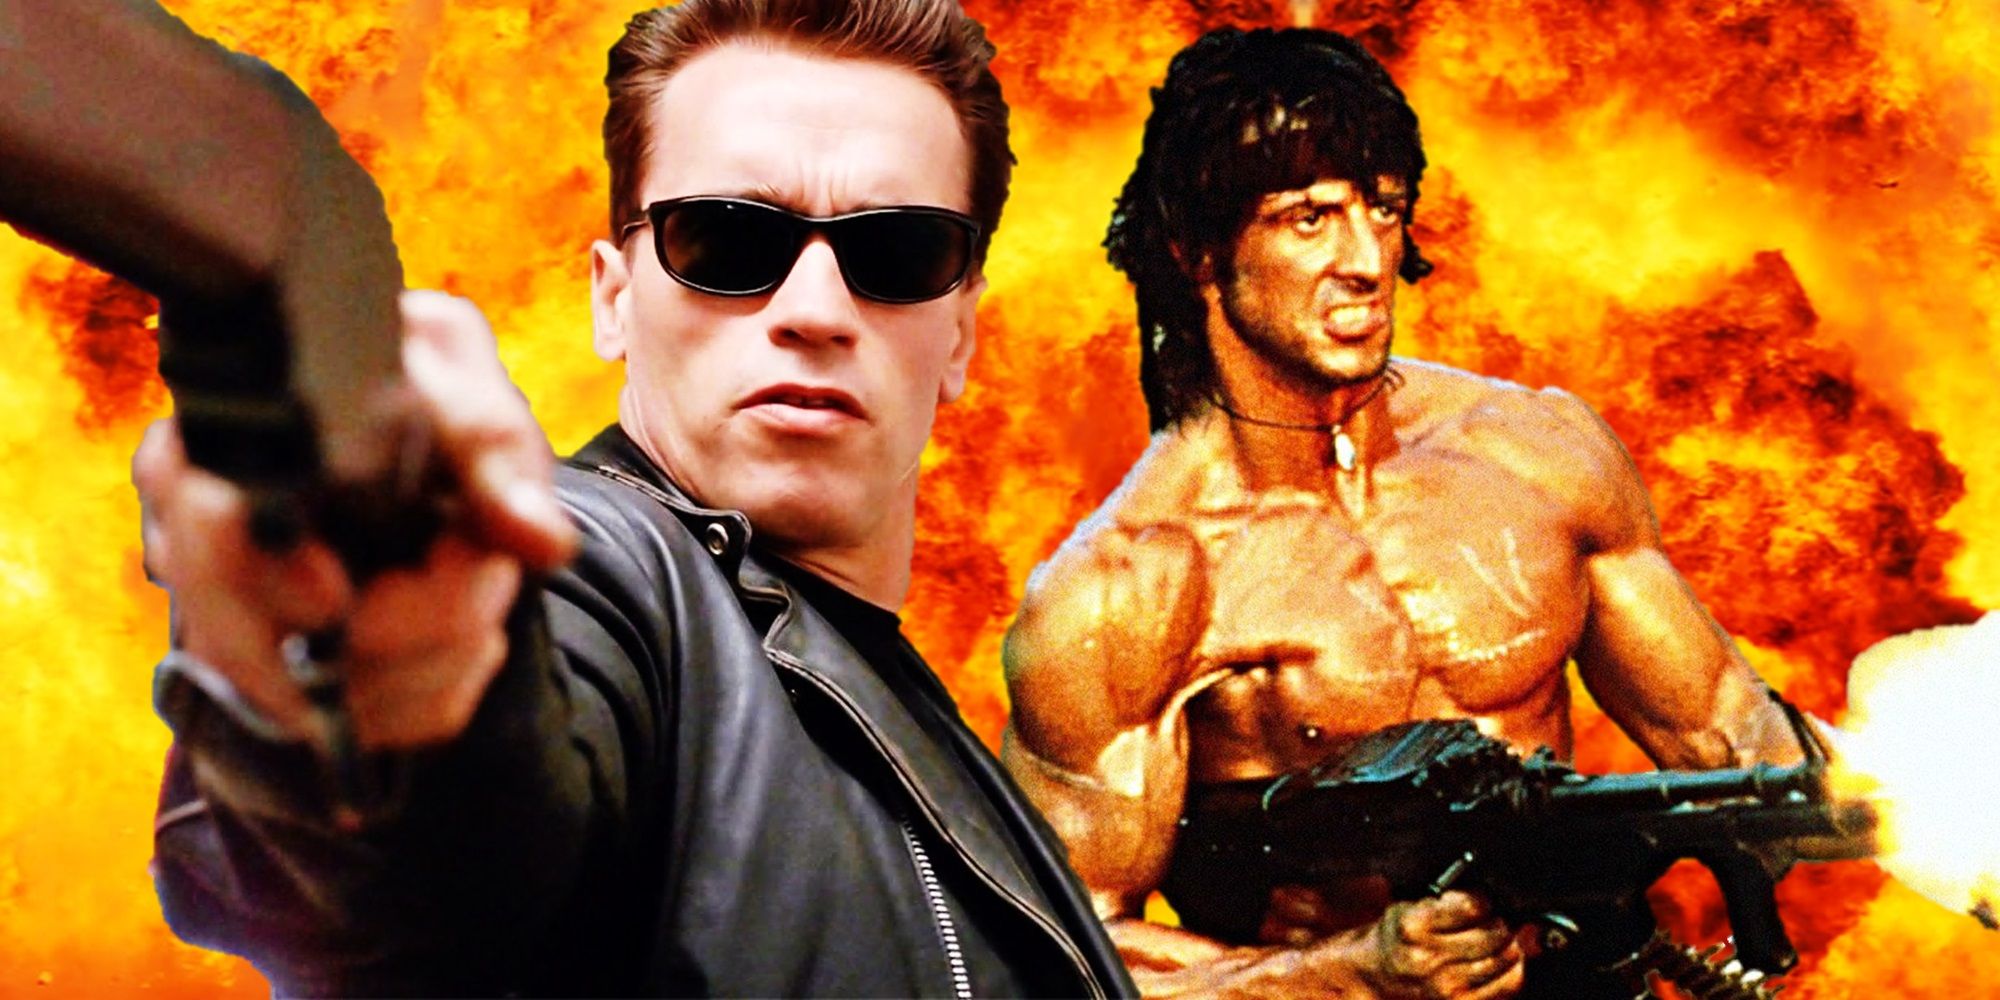 Arnold Schwarzenegger in Terminator 2 and Sylvester Stallone in Rambo First Blood Part II with an explosion in the background